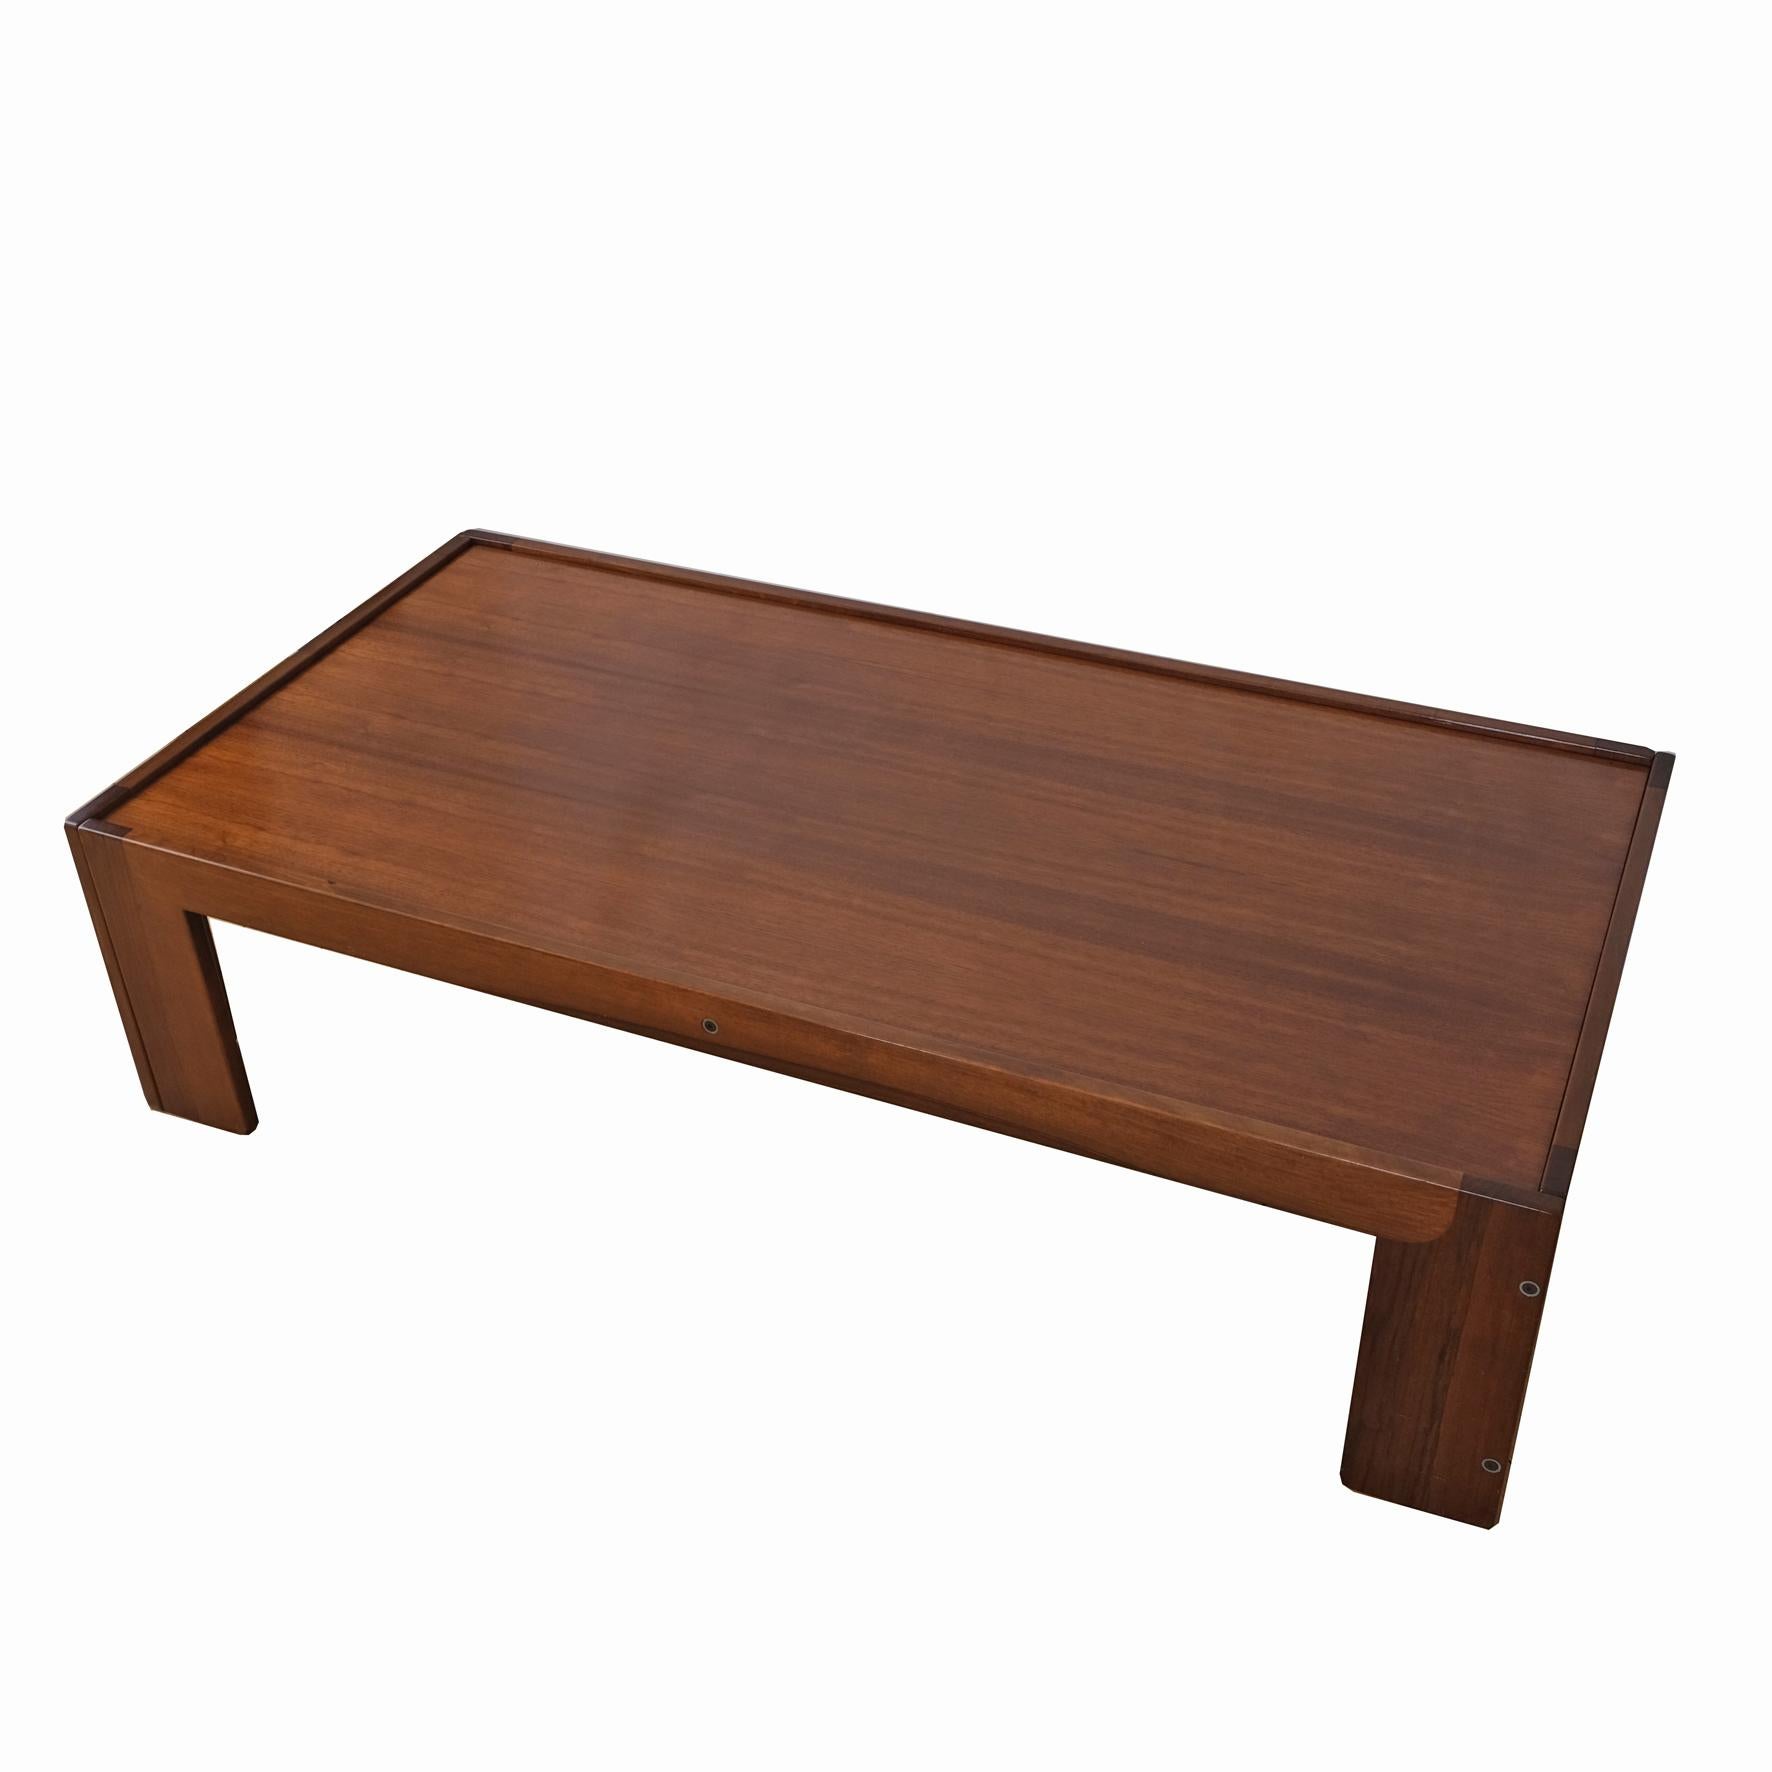 A rectangular walnut low table, the top plate rested on the frame supported by four rectangular feet.
Manufactured by Cassina.
With manufacturer's label underneath.
Italy.
1960s.

Provenance
Private collection

Literature
Domus 453, agosto